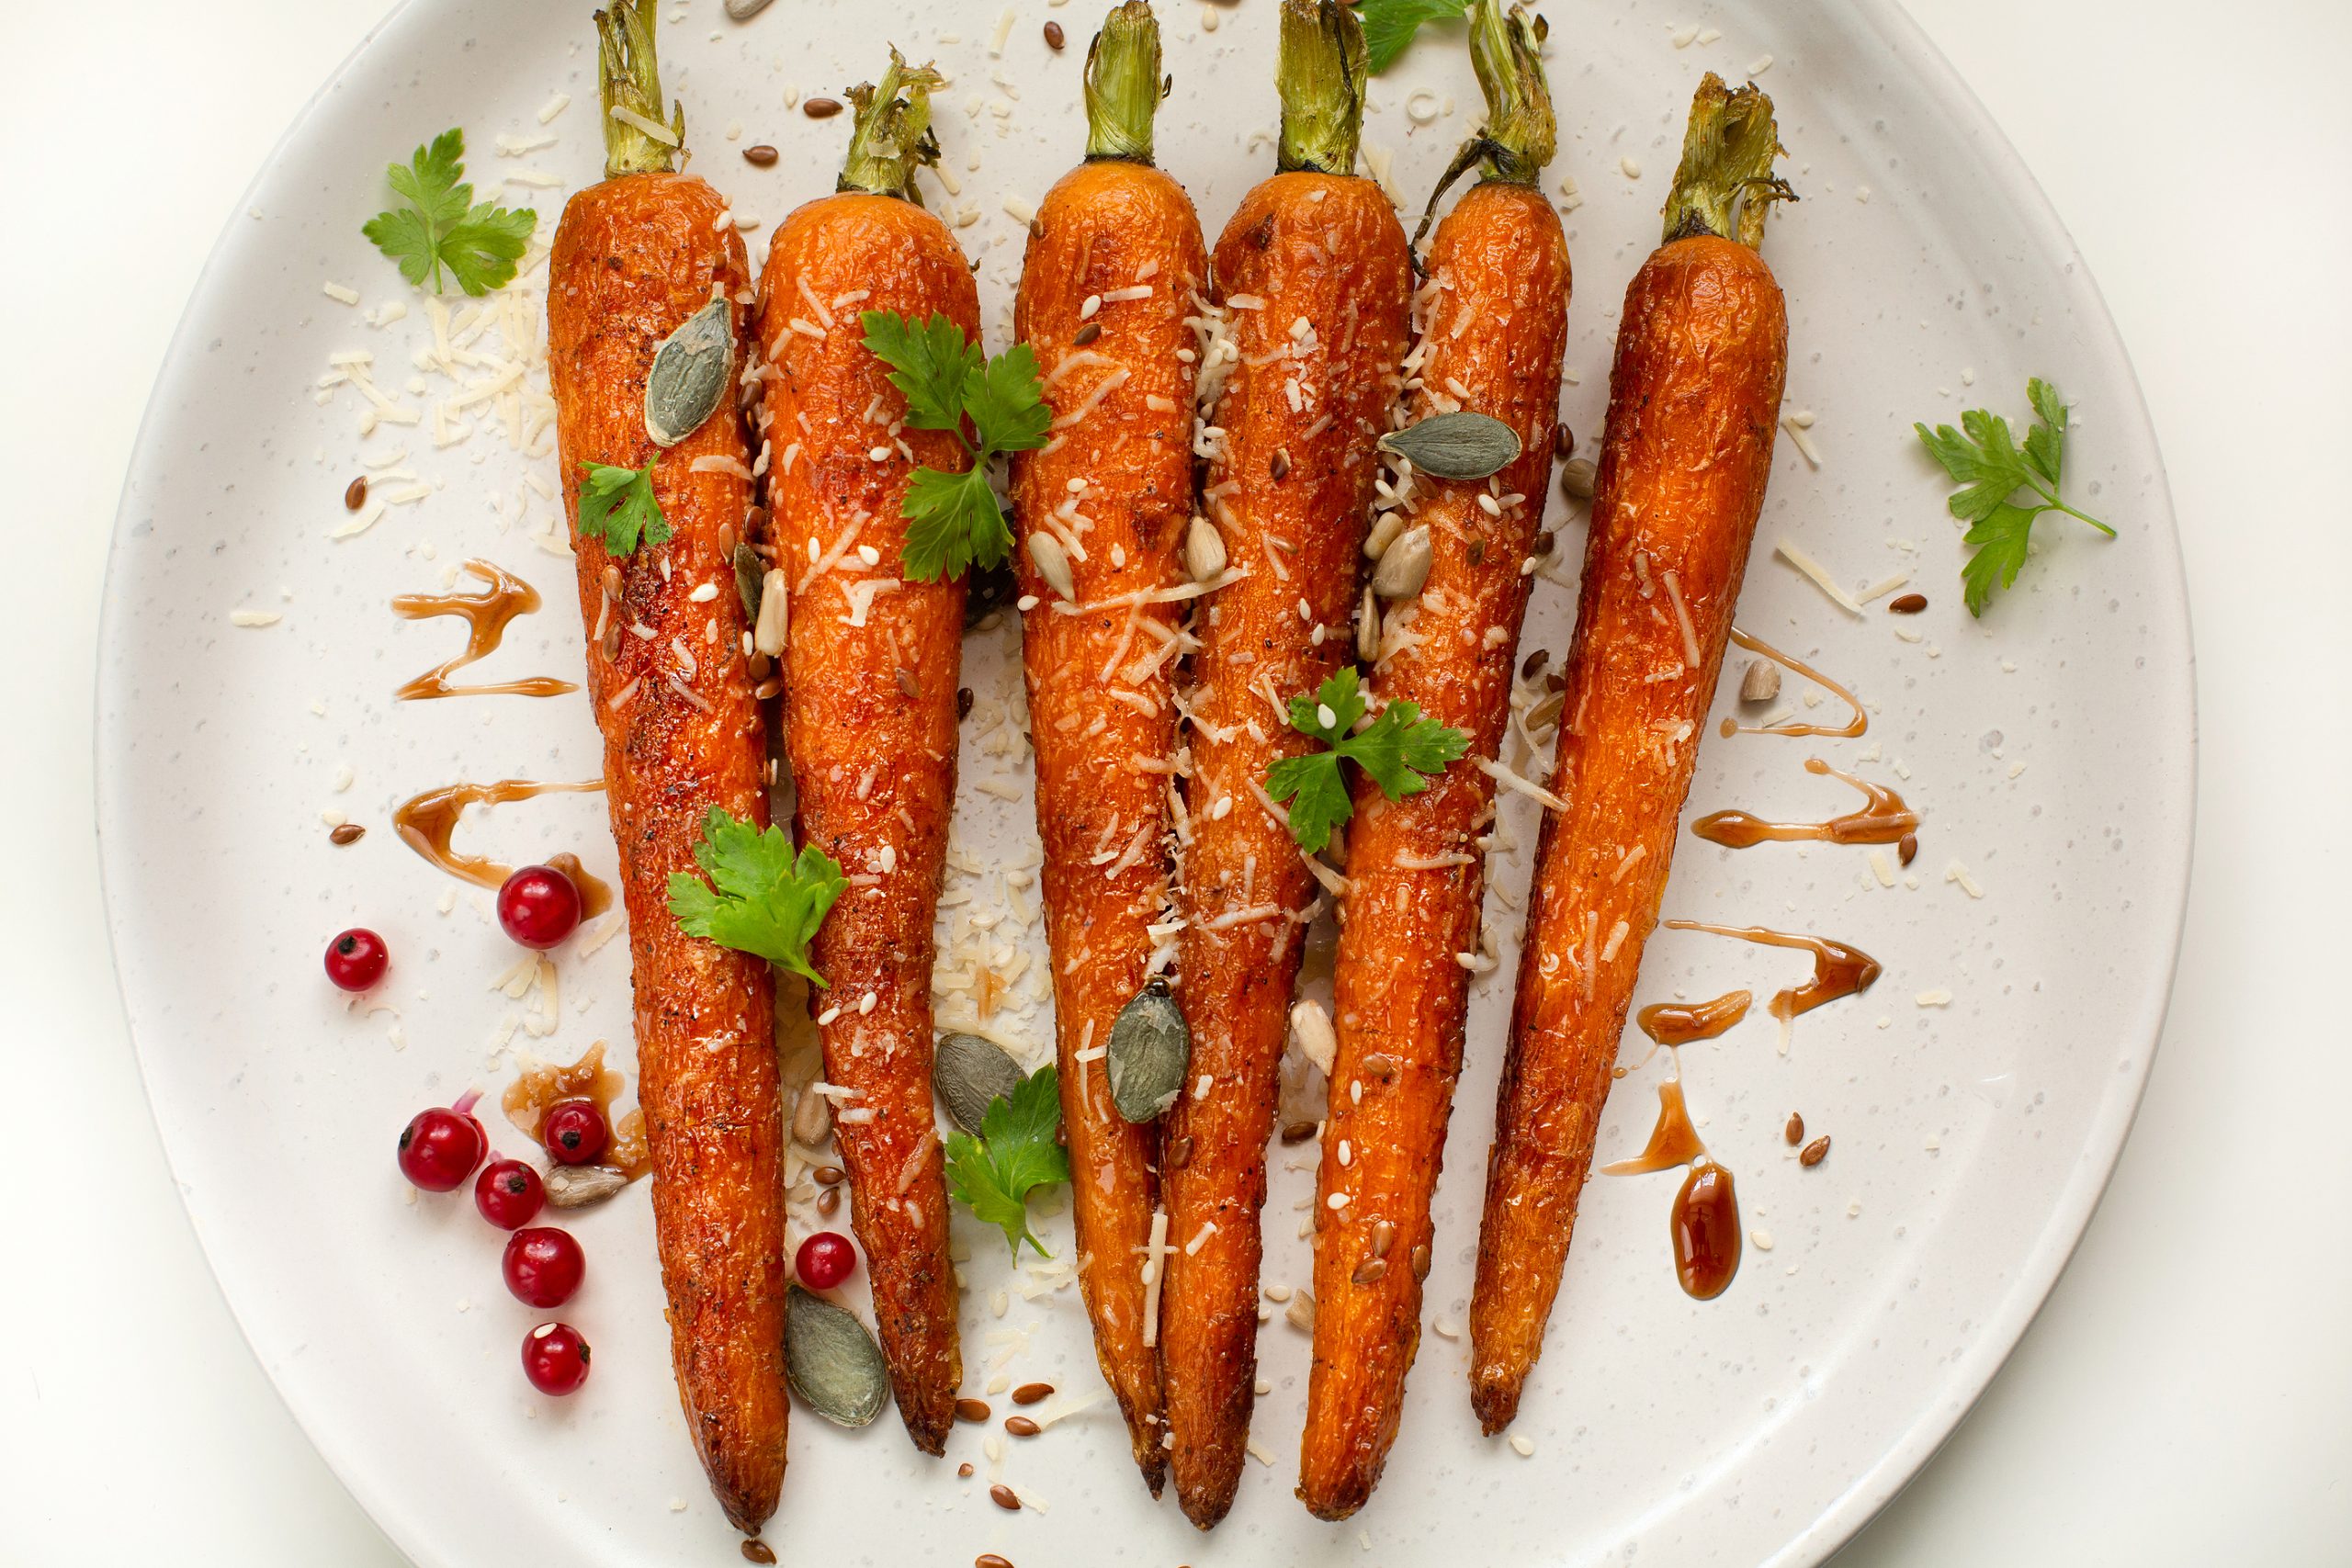 [RECIPE] Try our go-to gingery carrot sauce